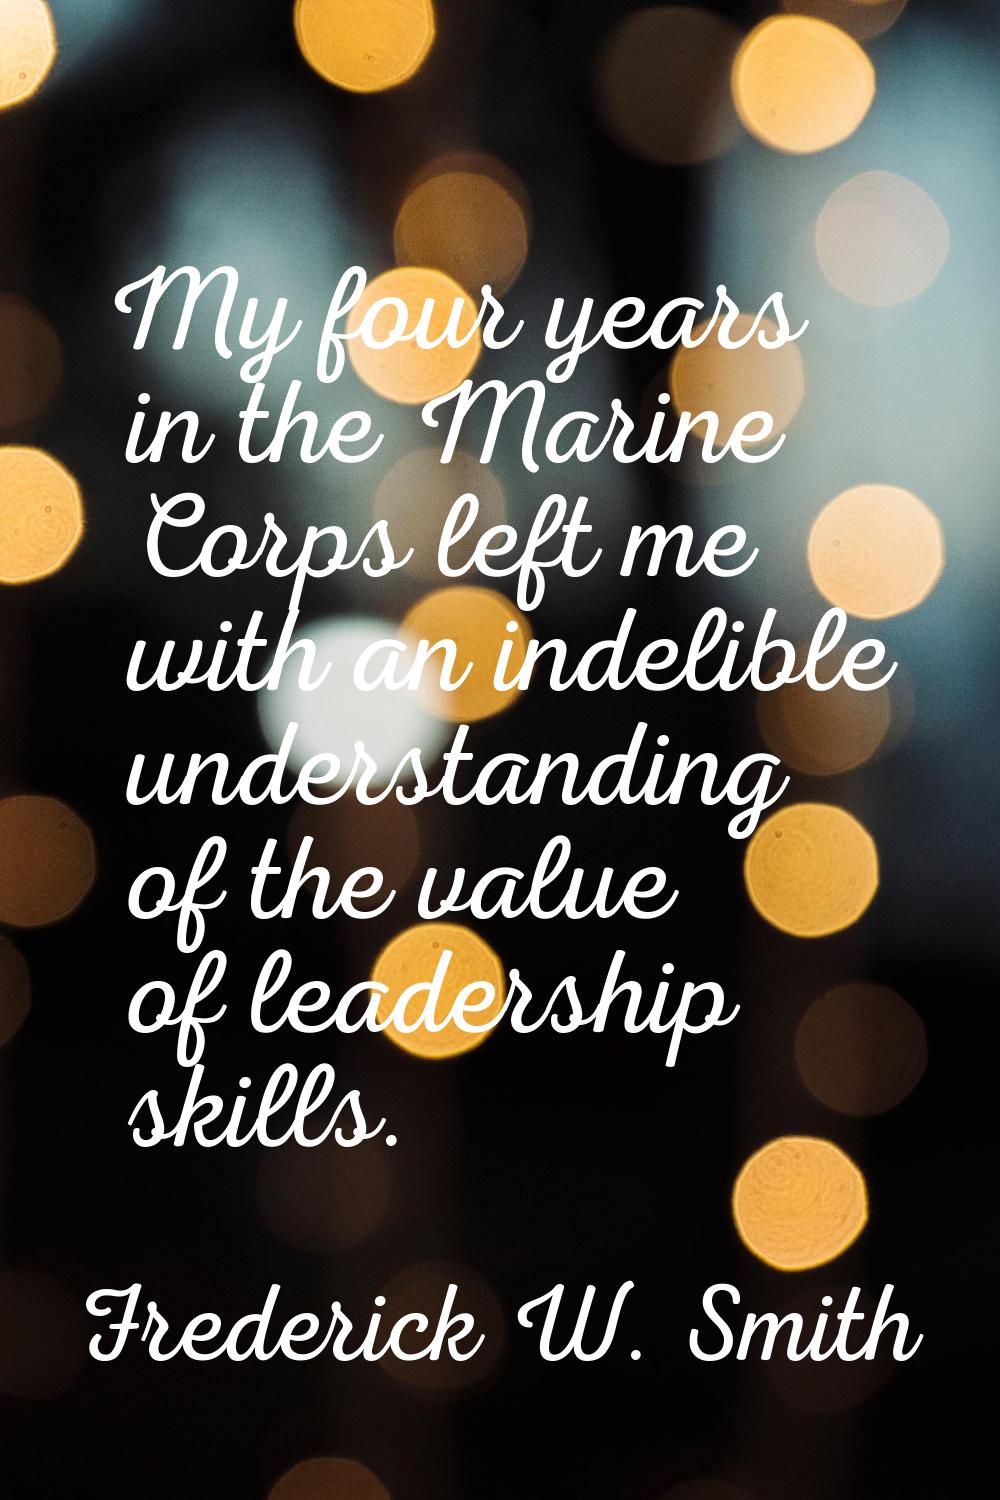 My four years in the Marine Corps left me with an indelible understanding of the value of leadershi